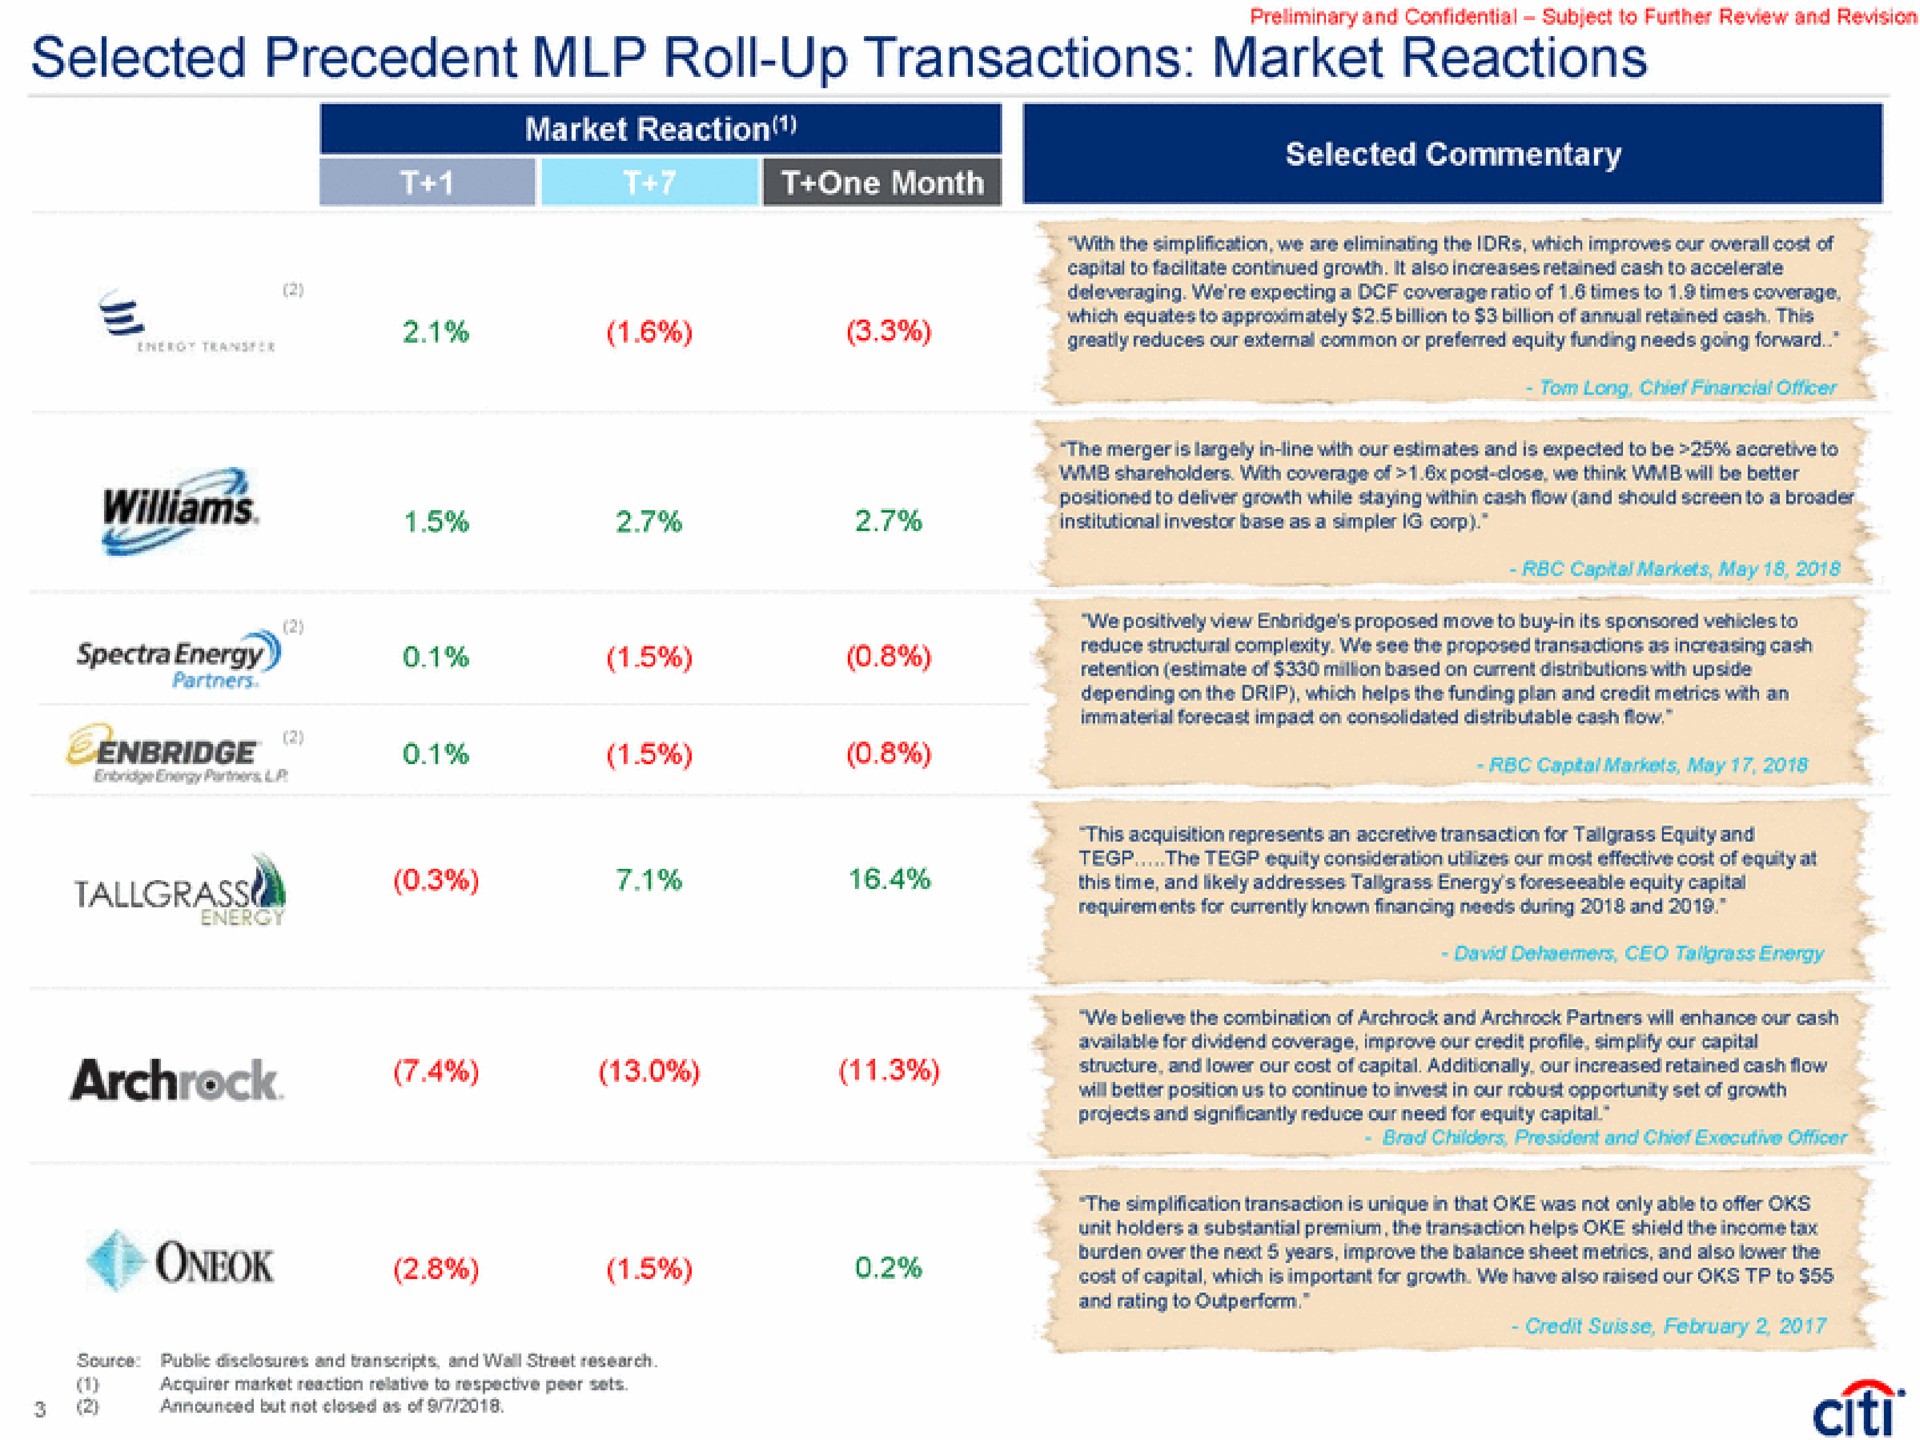 selected precedent roll up transactions market reactions | Citi